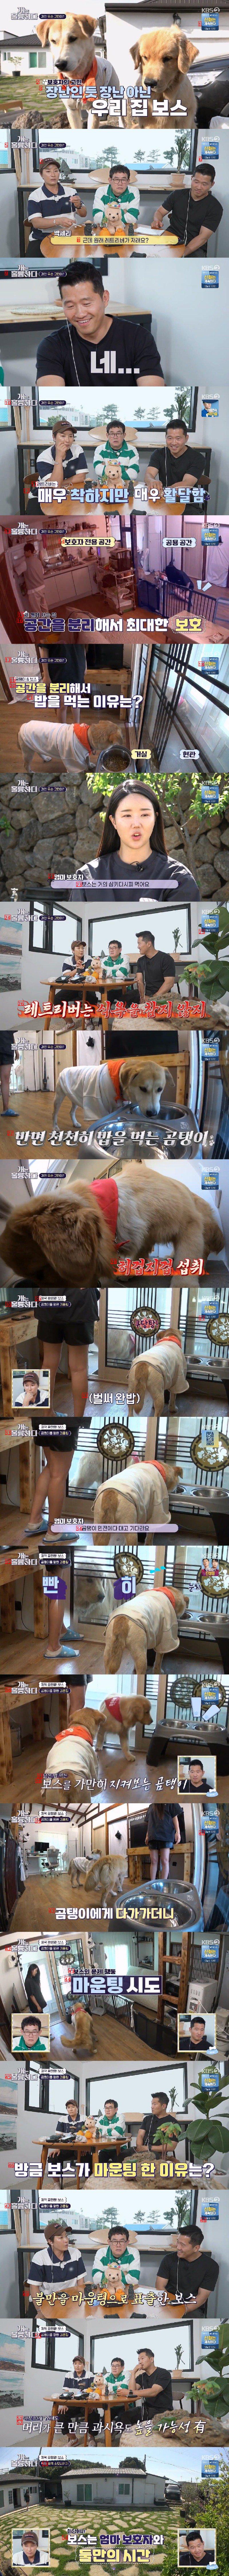 Kang Hyungwook, a retriever who studied a lot but couldn't handle it